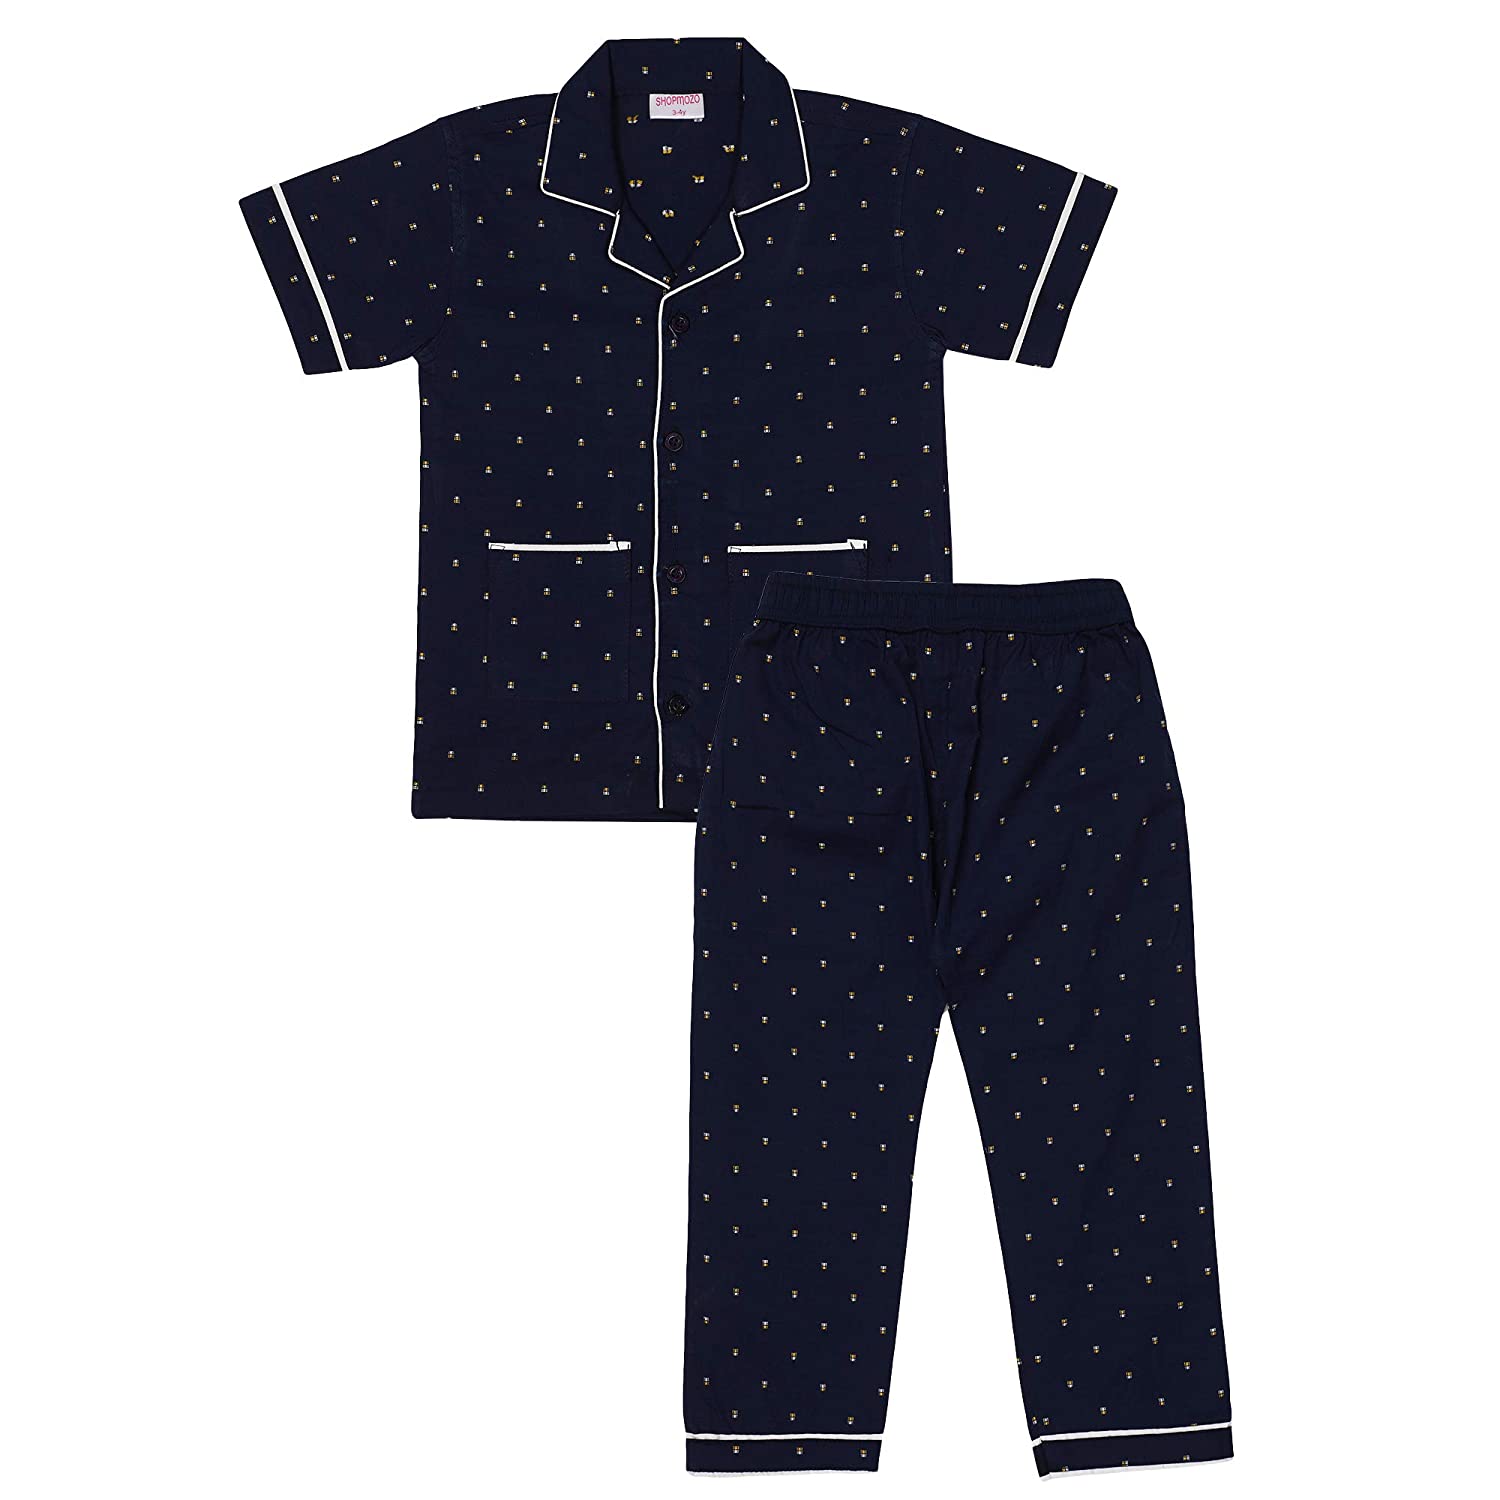 Boys, 0-3 Months to 18-24 Months - Babyoye Nightwear Online | Buy Baby &  Kids Products at FirstCry.com